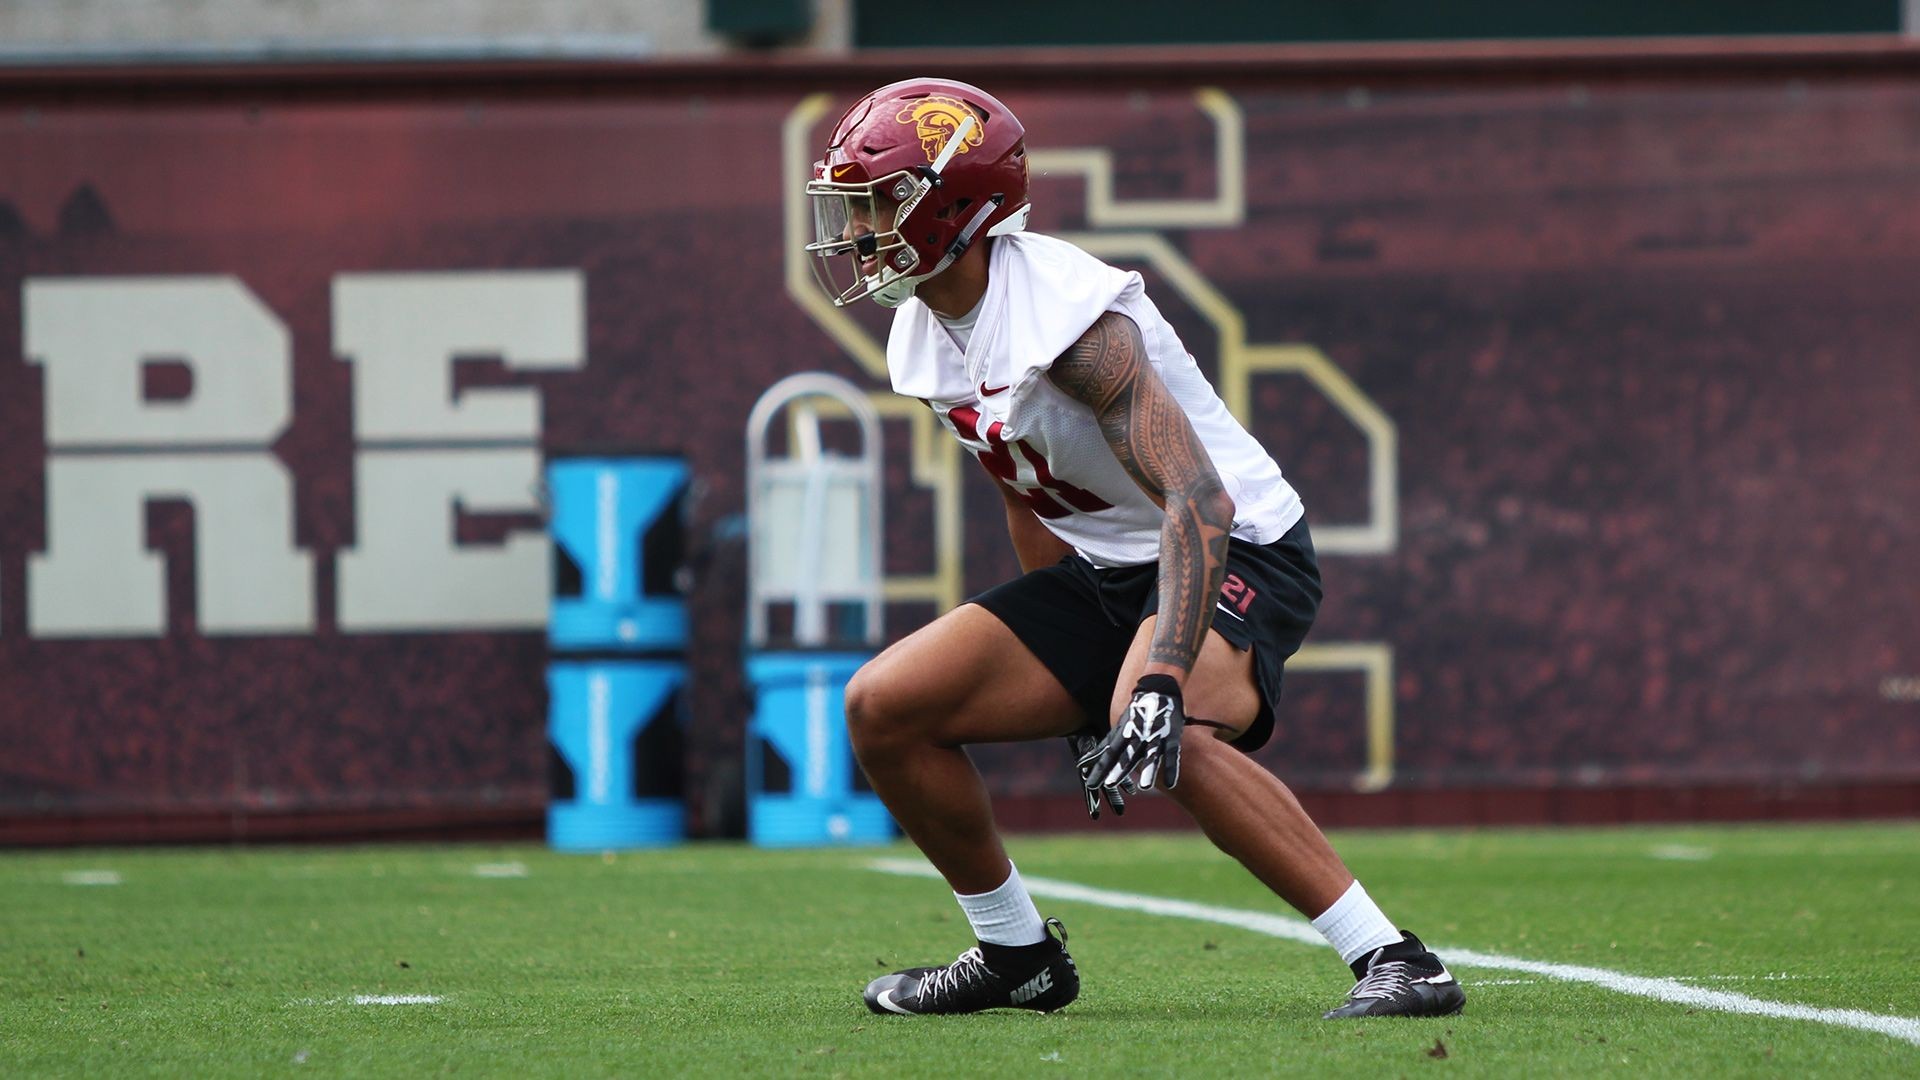 USC football Fall Camp 2019 Takeaways from the first weekend